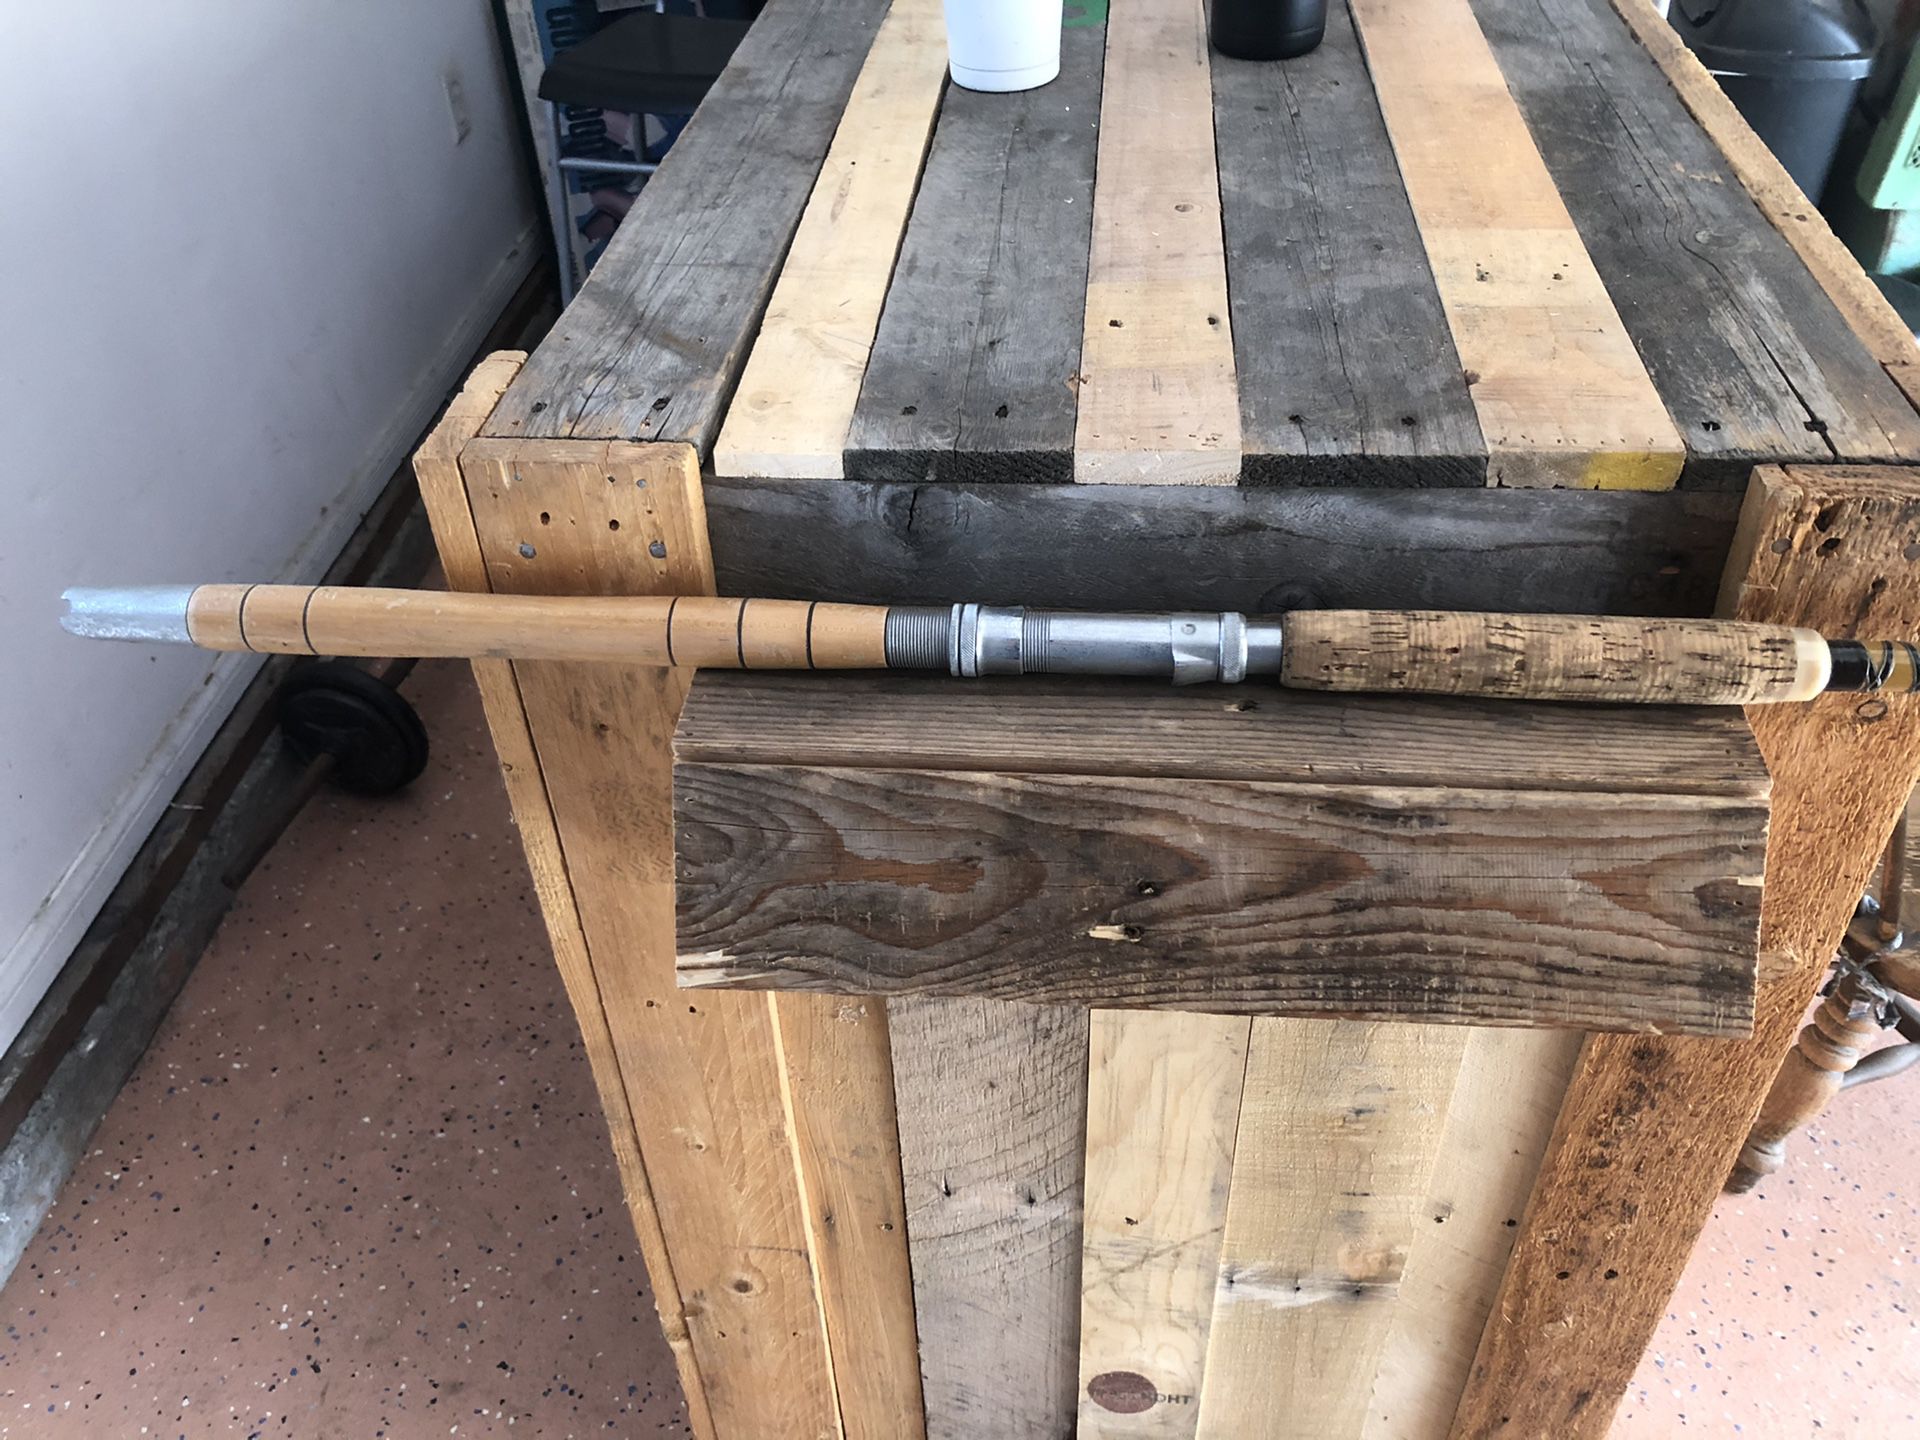 S.I.R. Offshore heavy rod with rollers intact and working